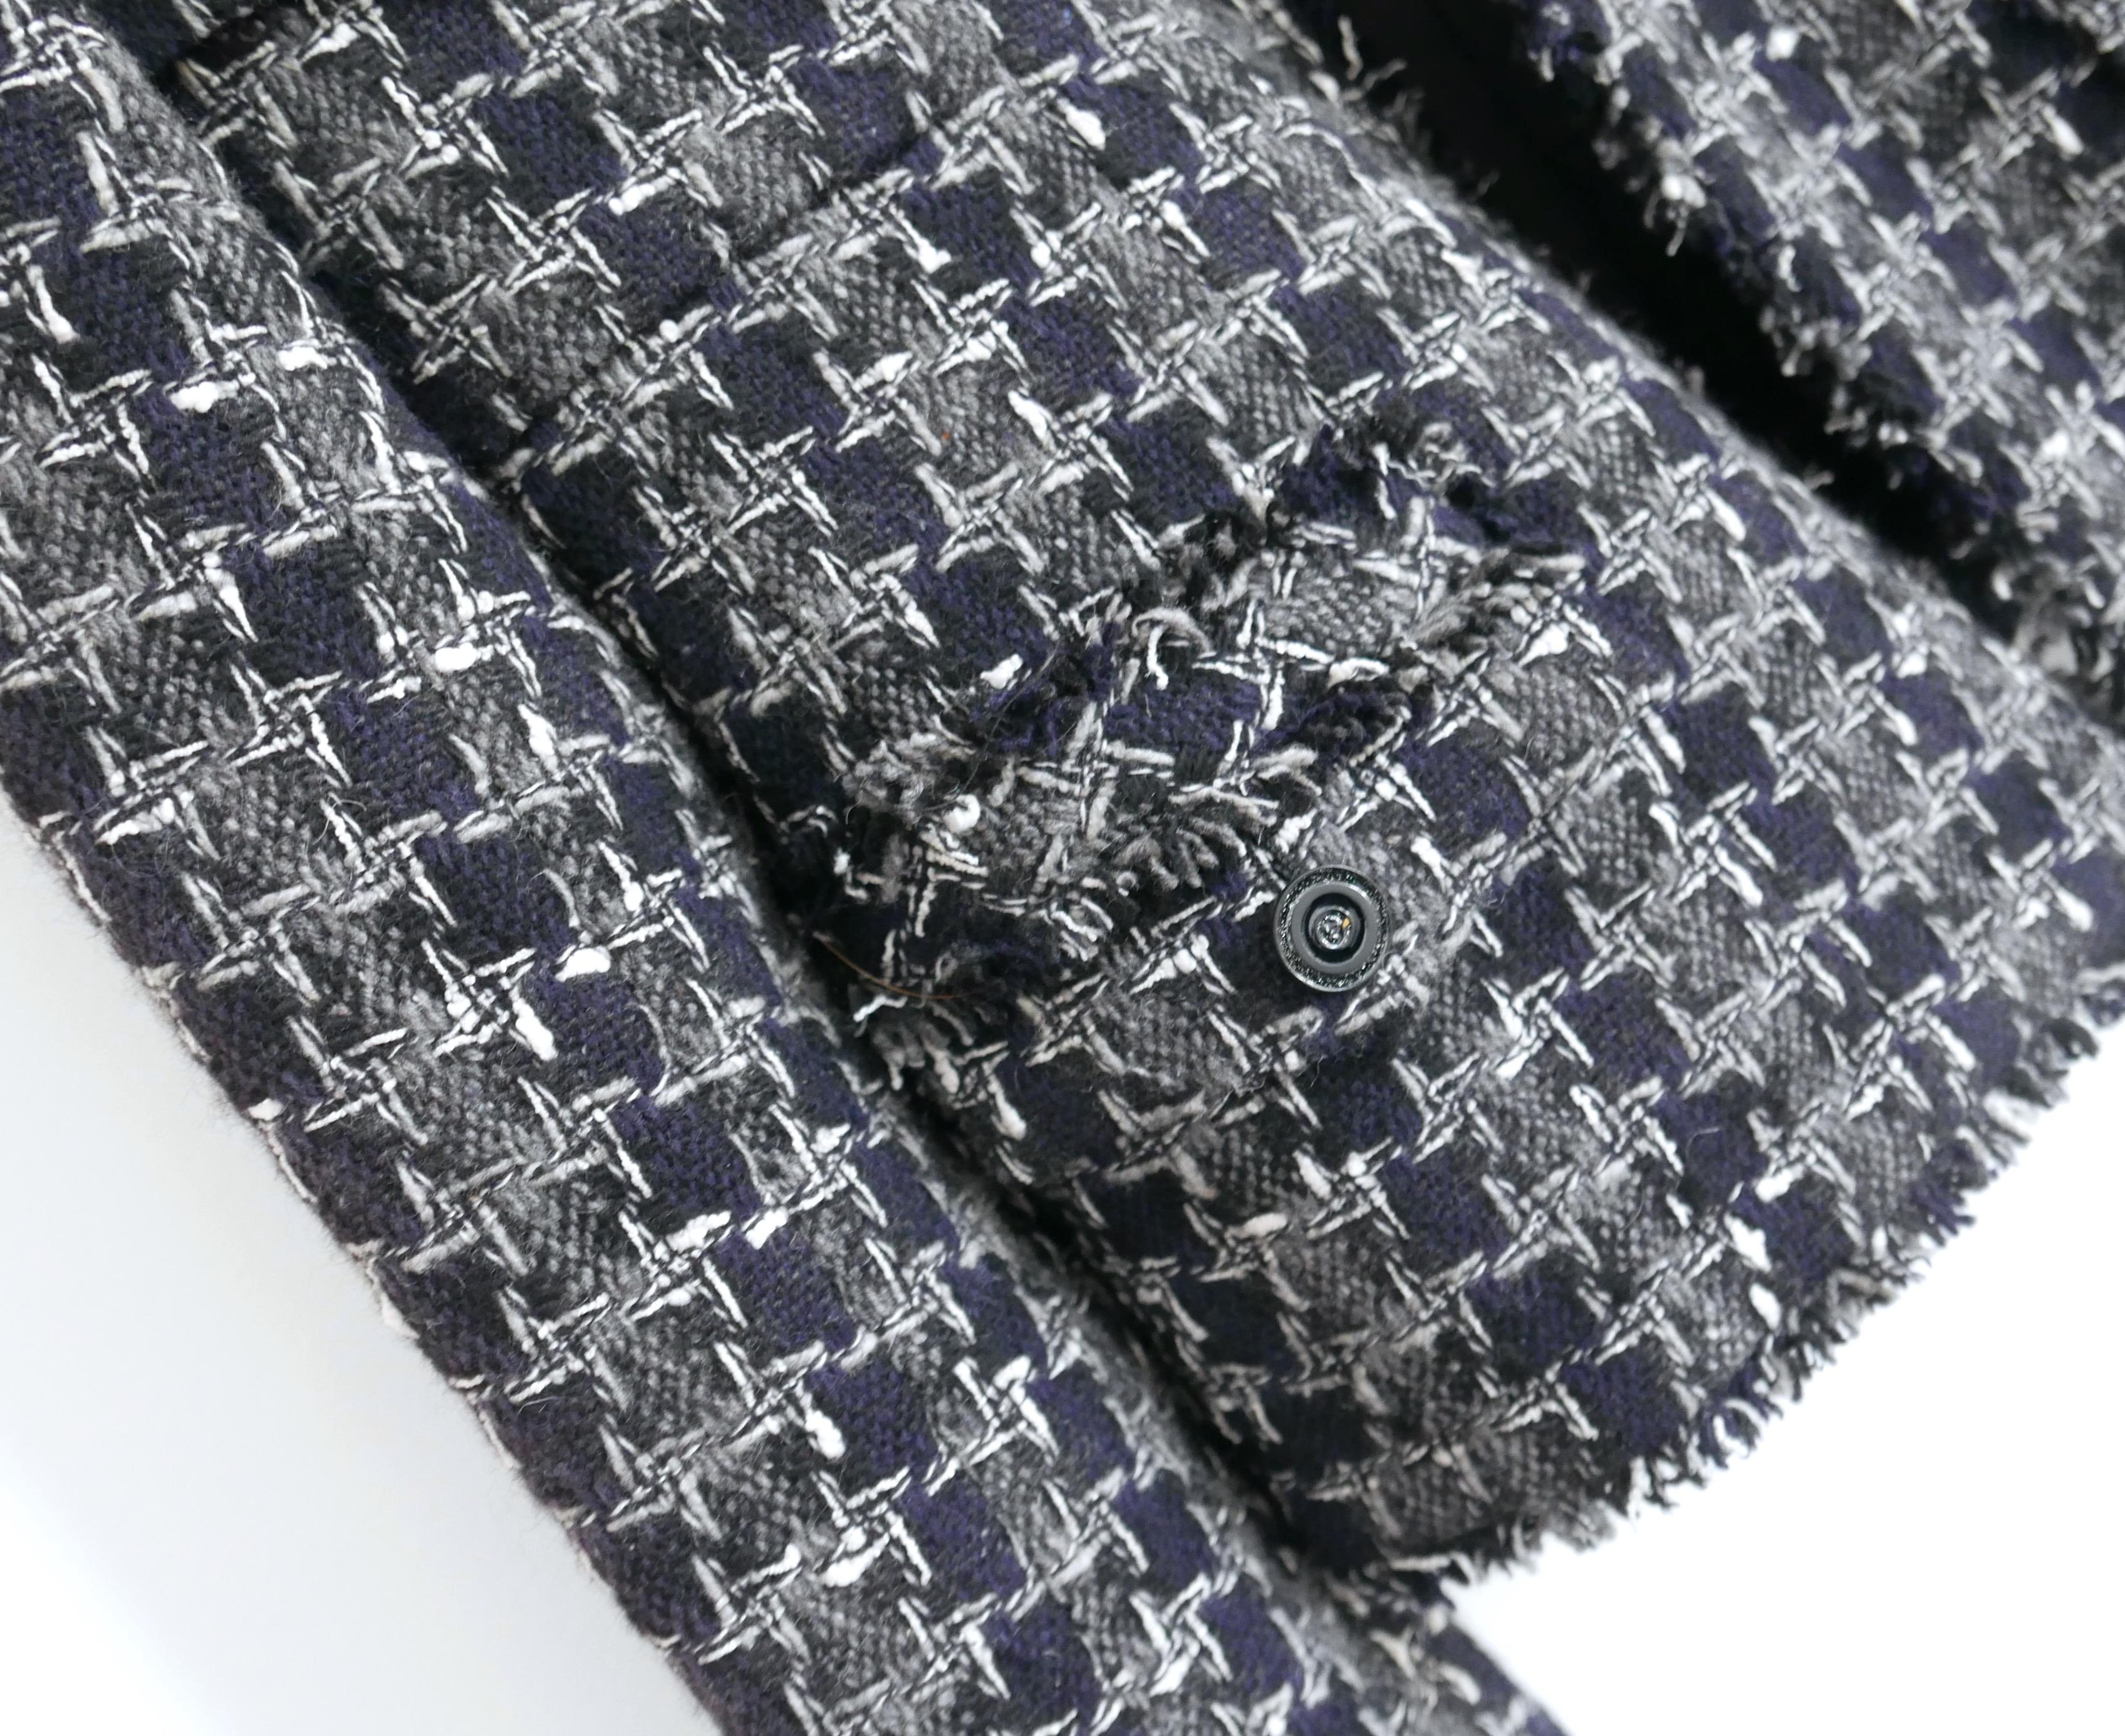 Stunning Chanel houndstooth tweed jacket from the Fall 2007 07A - collection. Worn once and comes with spare button/fabric swatch. 
Made from super soft 90% cashmere navy and grey check tweed with raw edged detailing. It has a semi tailored, open